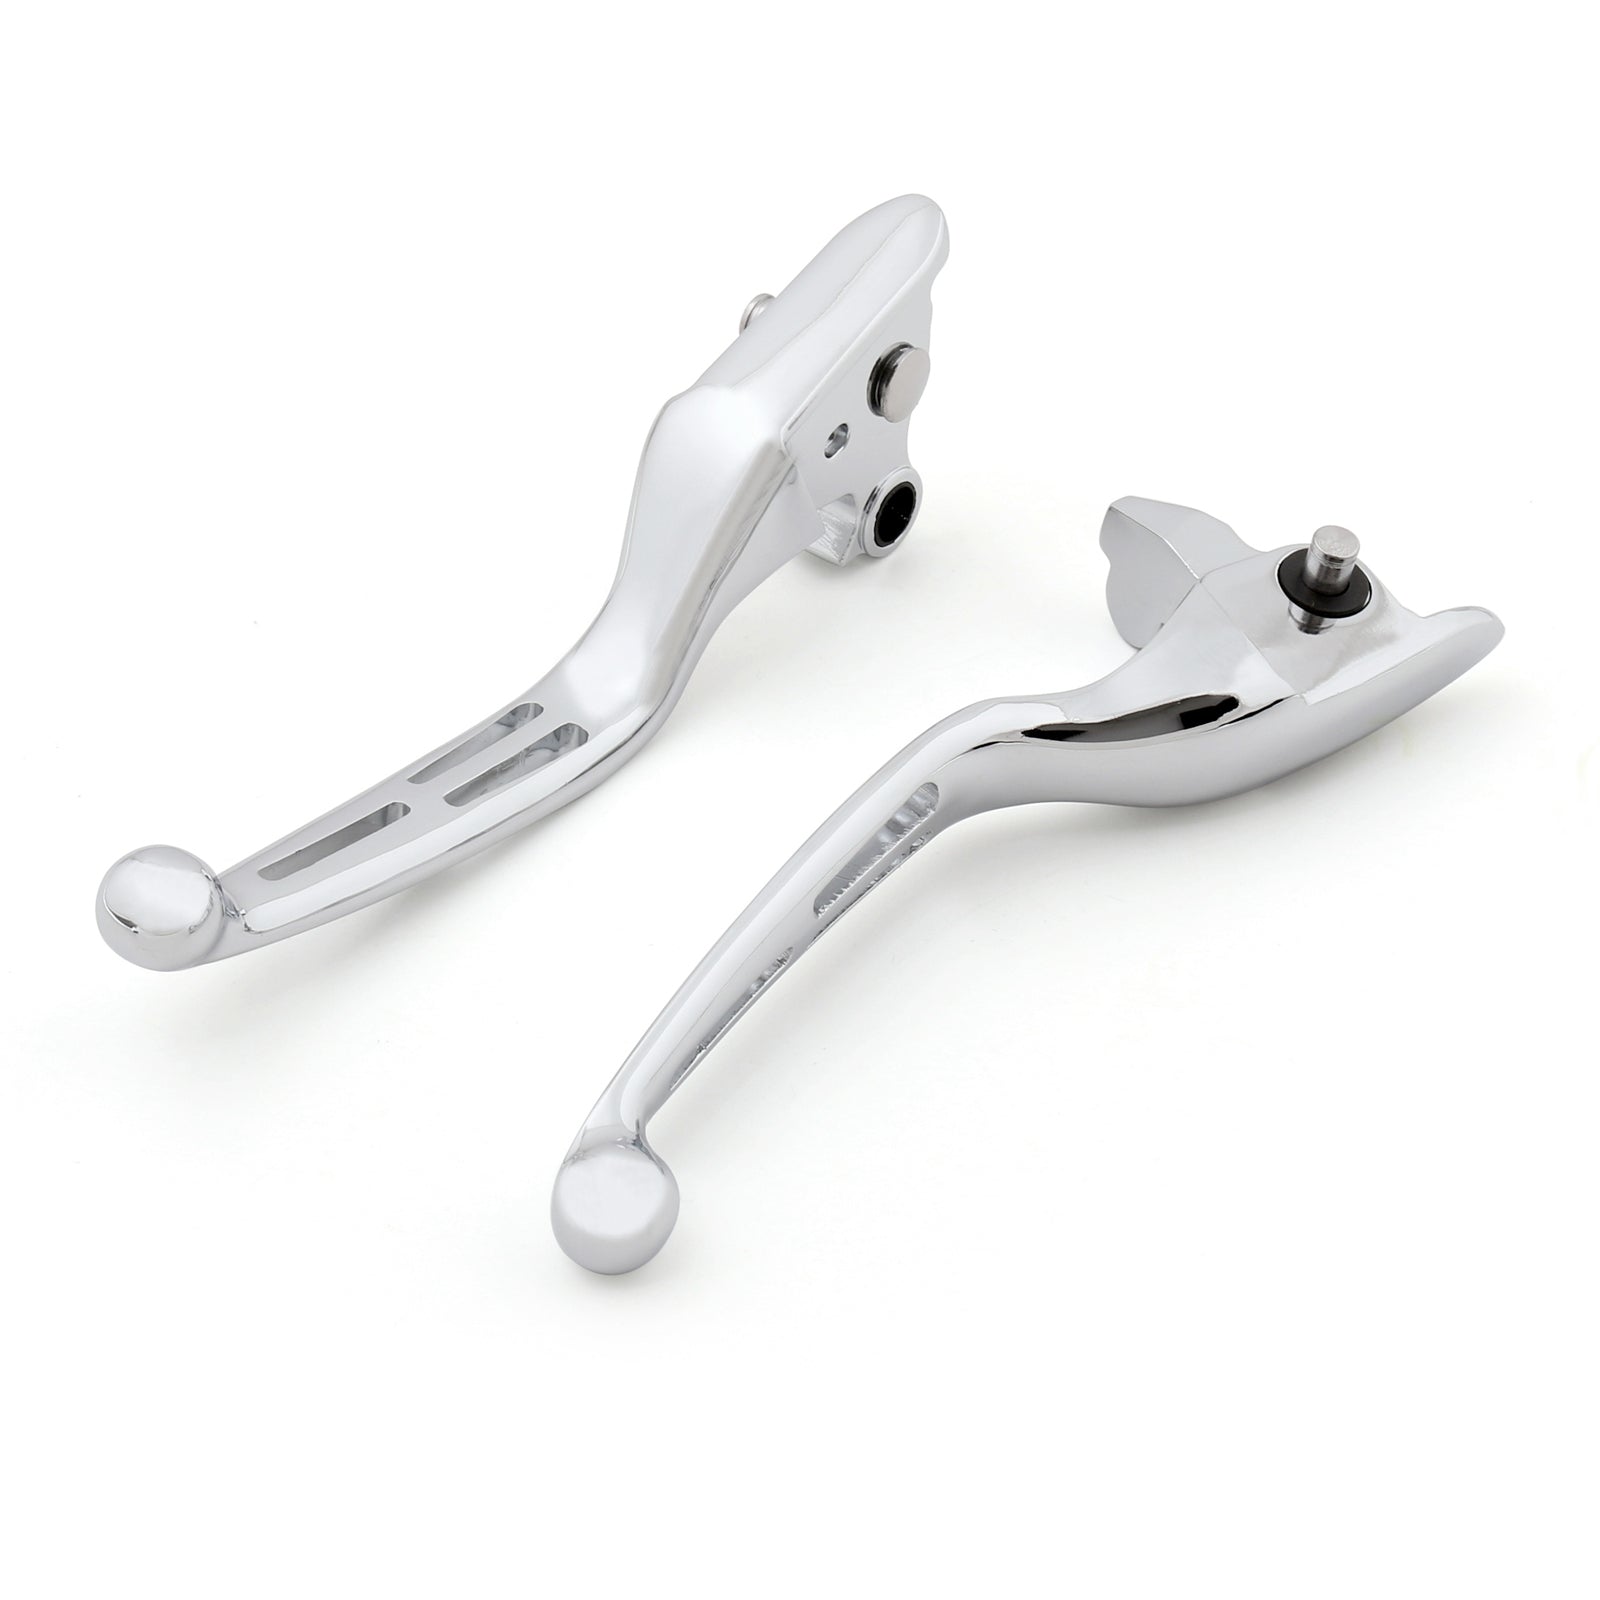 Brake Clutch Levers For Harley Road King Electra Glide Touring 2008-2013 Chrome Generic